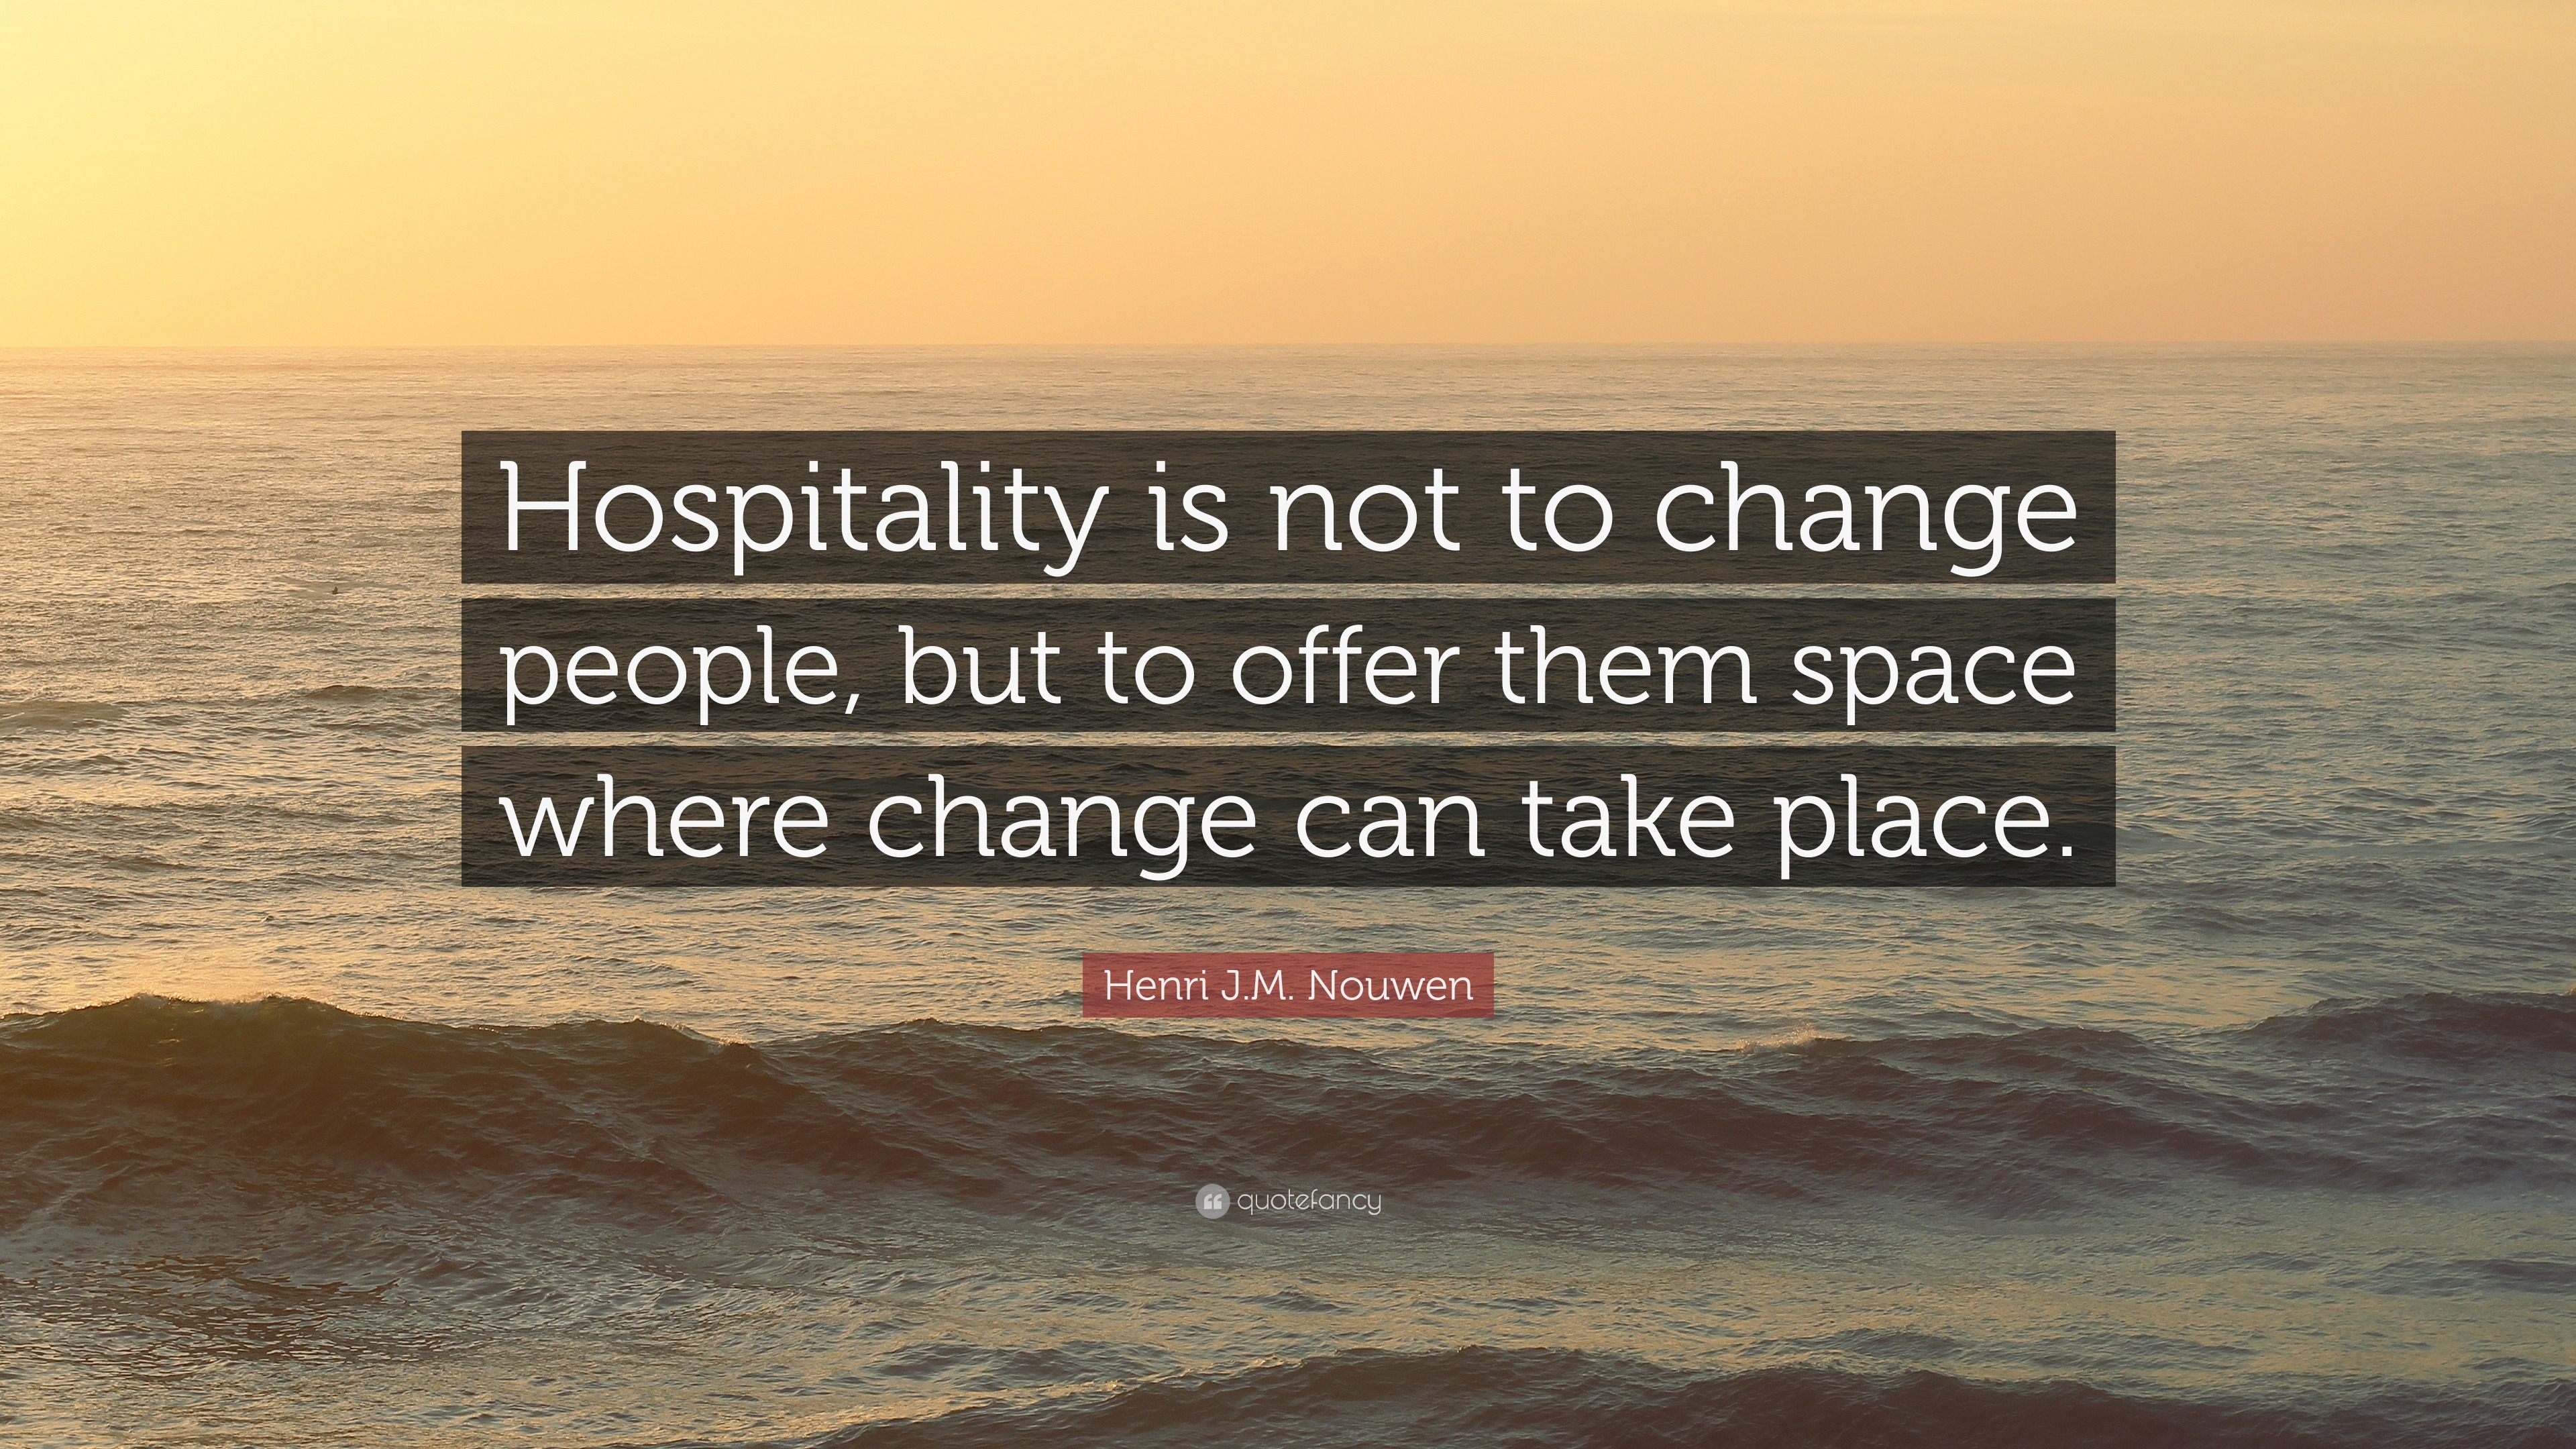 Hospitality change people quote quotes but offer space them where famous faith nouwen henri take place bono rich put too